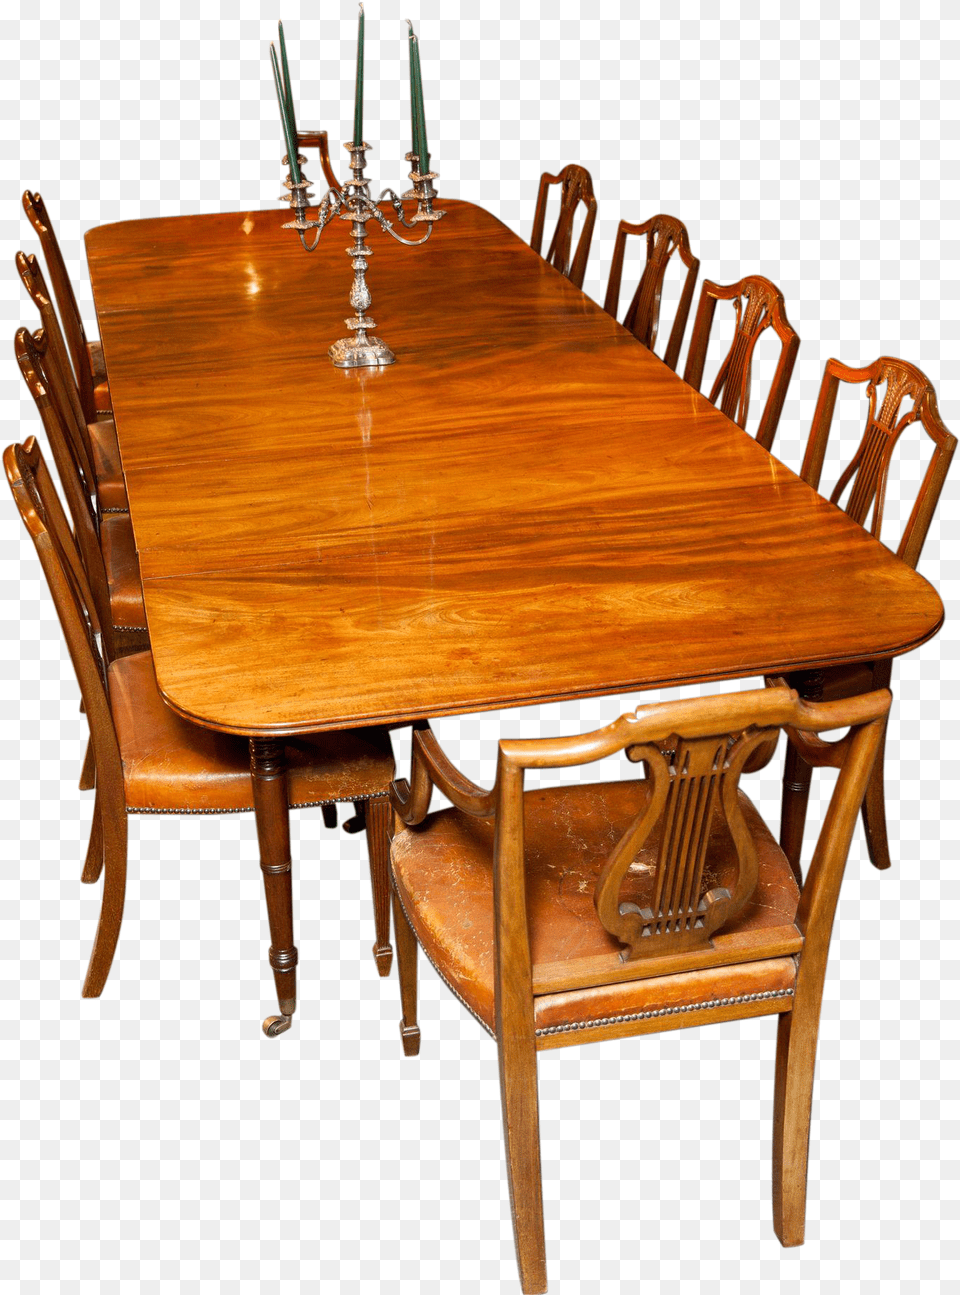 A Rare English Antique Mahogany Campaign Dining Table Kitchen Amp Dining Room Table, Architecture, Tabletop, Indoors, Furniture Free Png Download